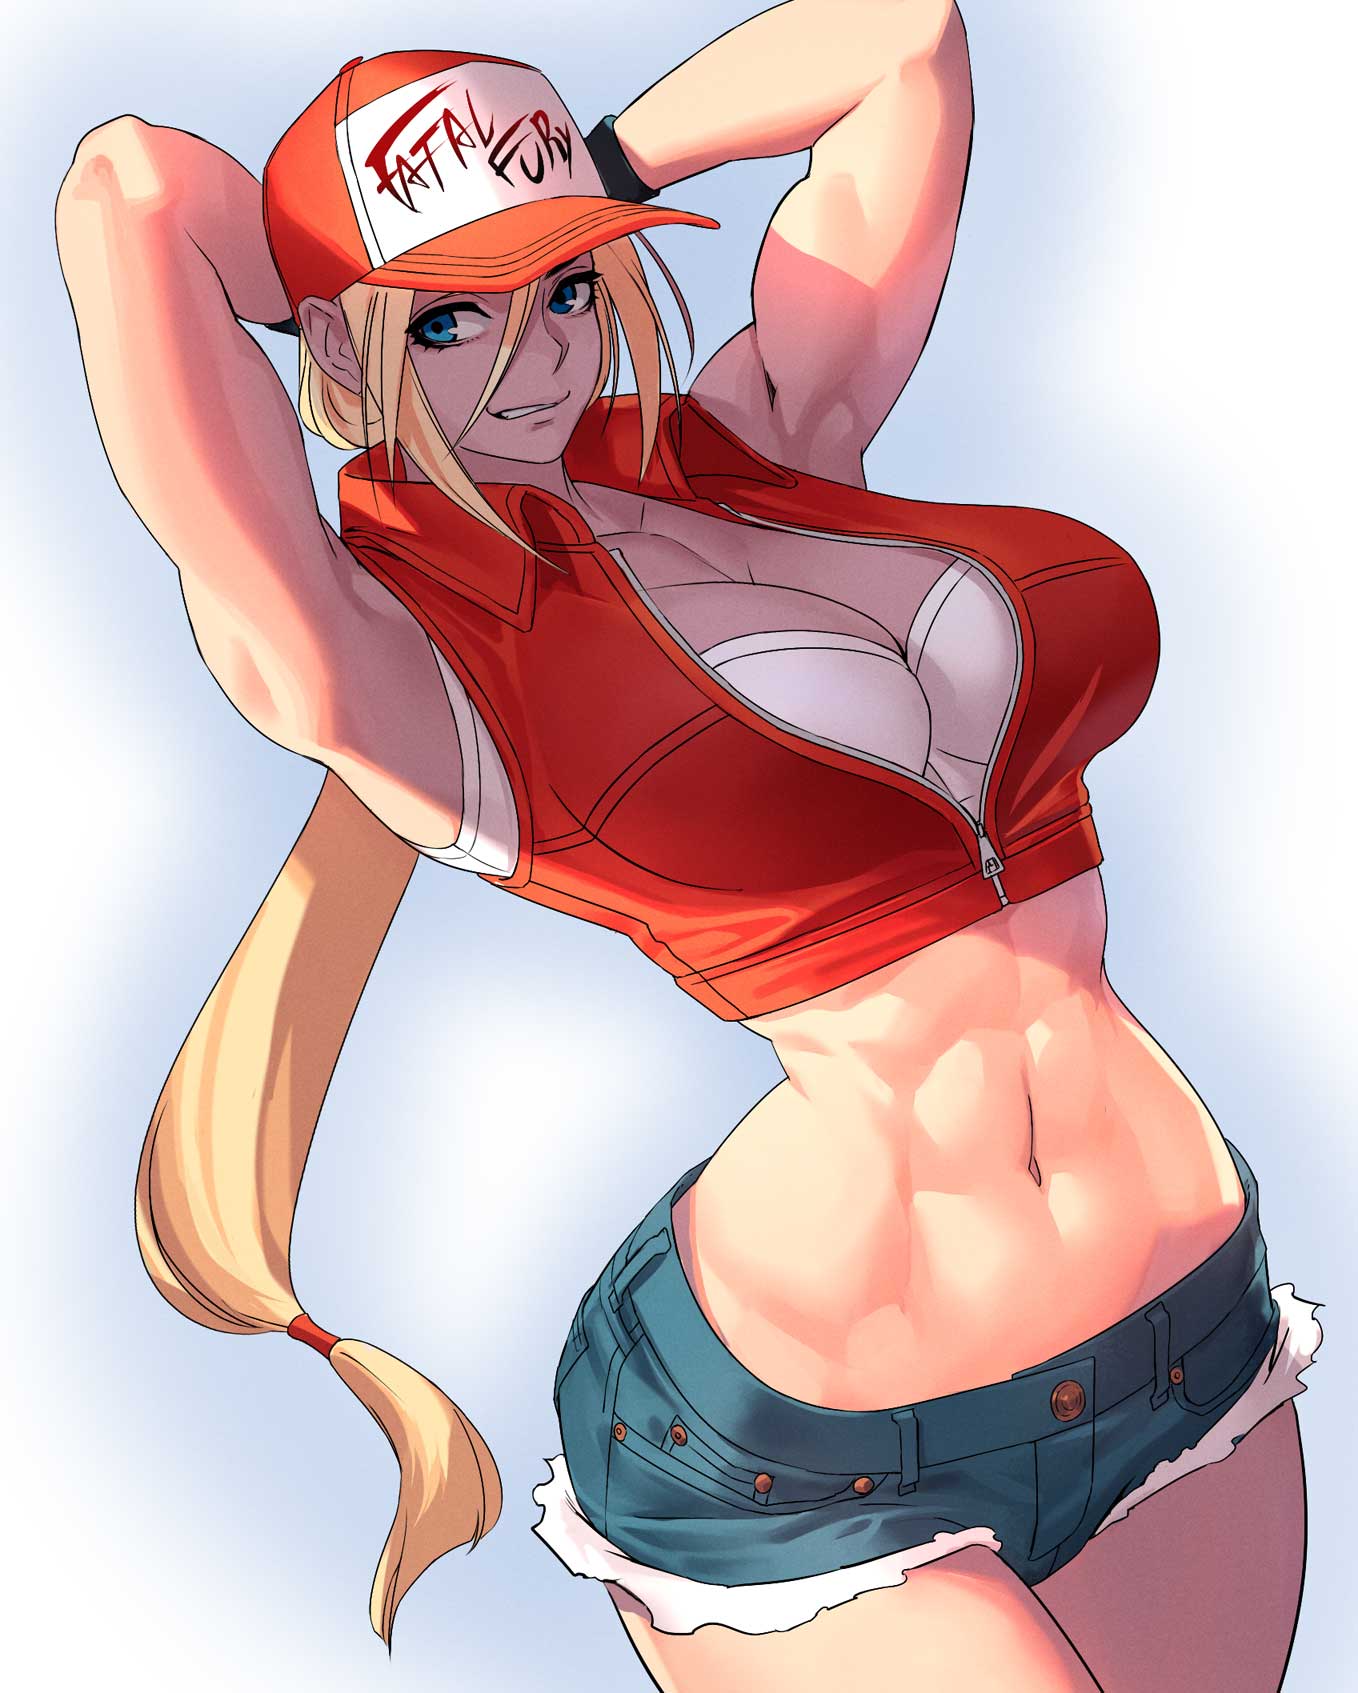 Anime 1358x1693 anime girls anime big boobs cleavage muscles 6-pack abs biceps thighs jean shorts portrait display